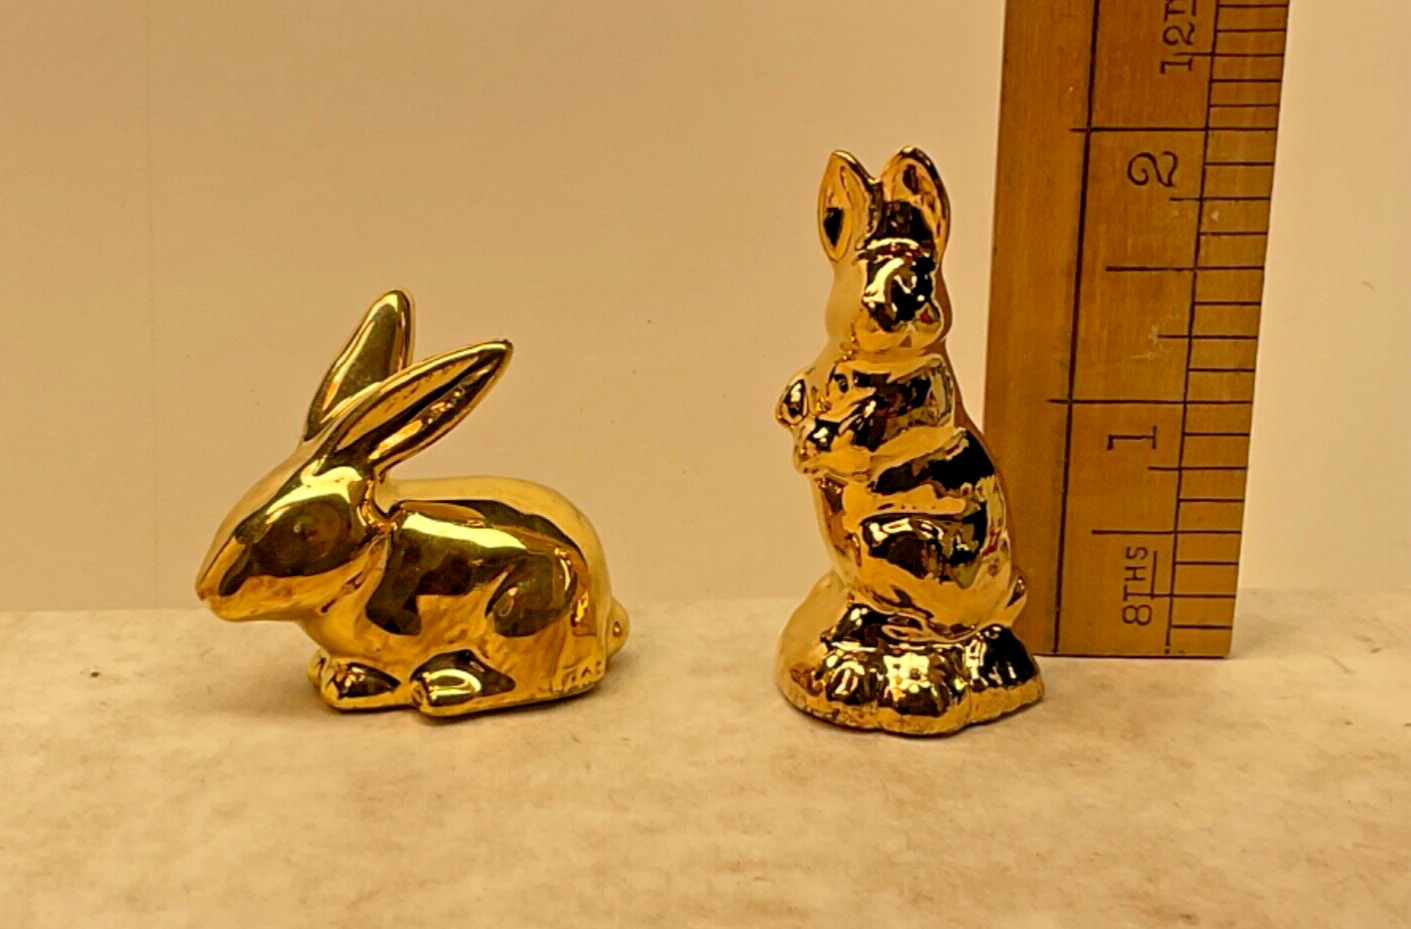 -Wade Fest PAIR of GOLD Rabbit or Bunny Figurines, Mint